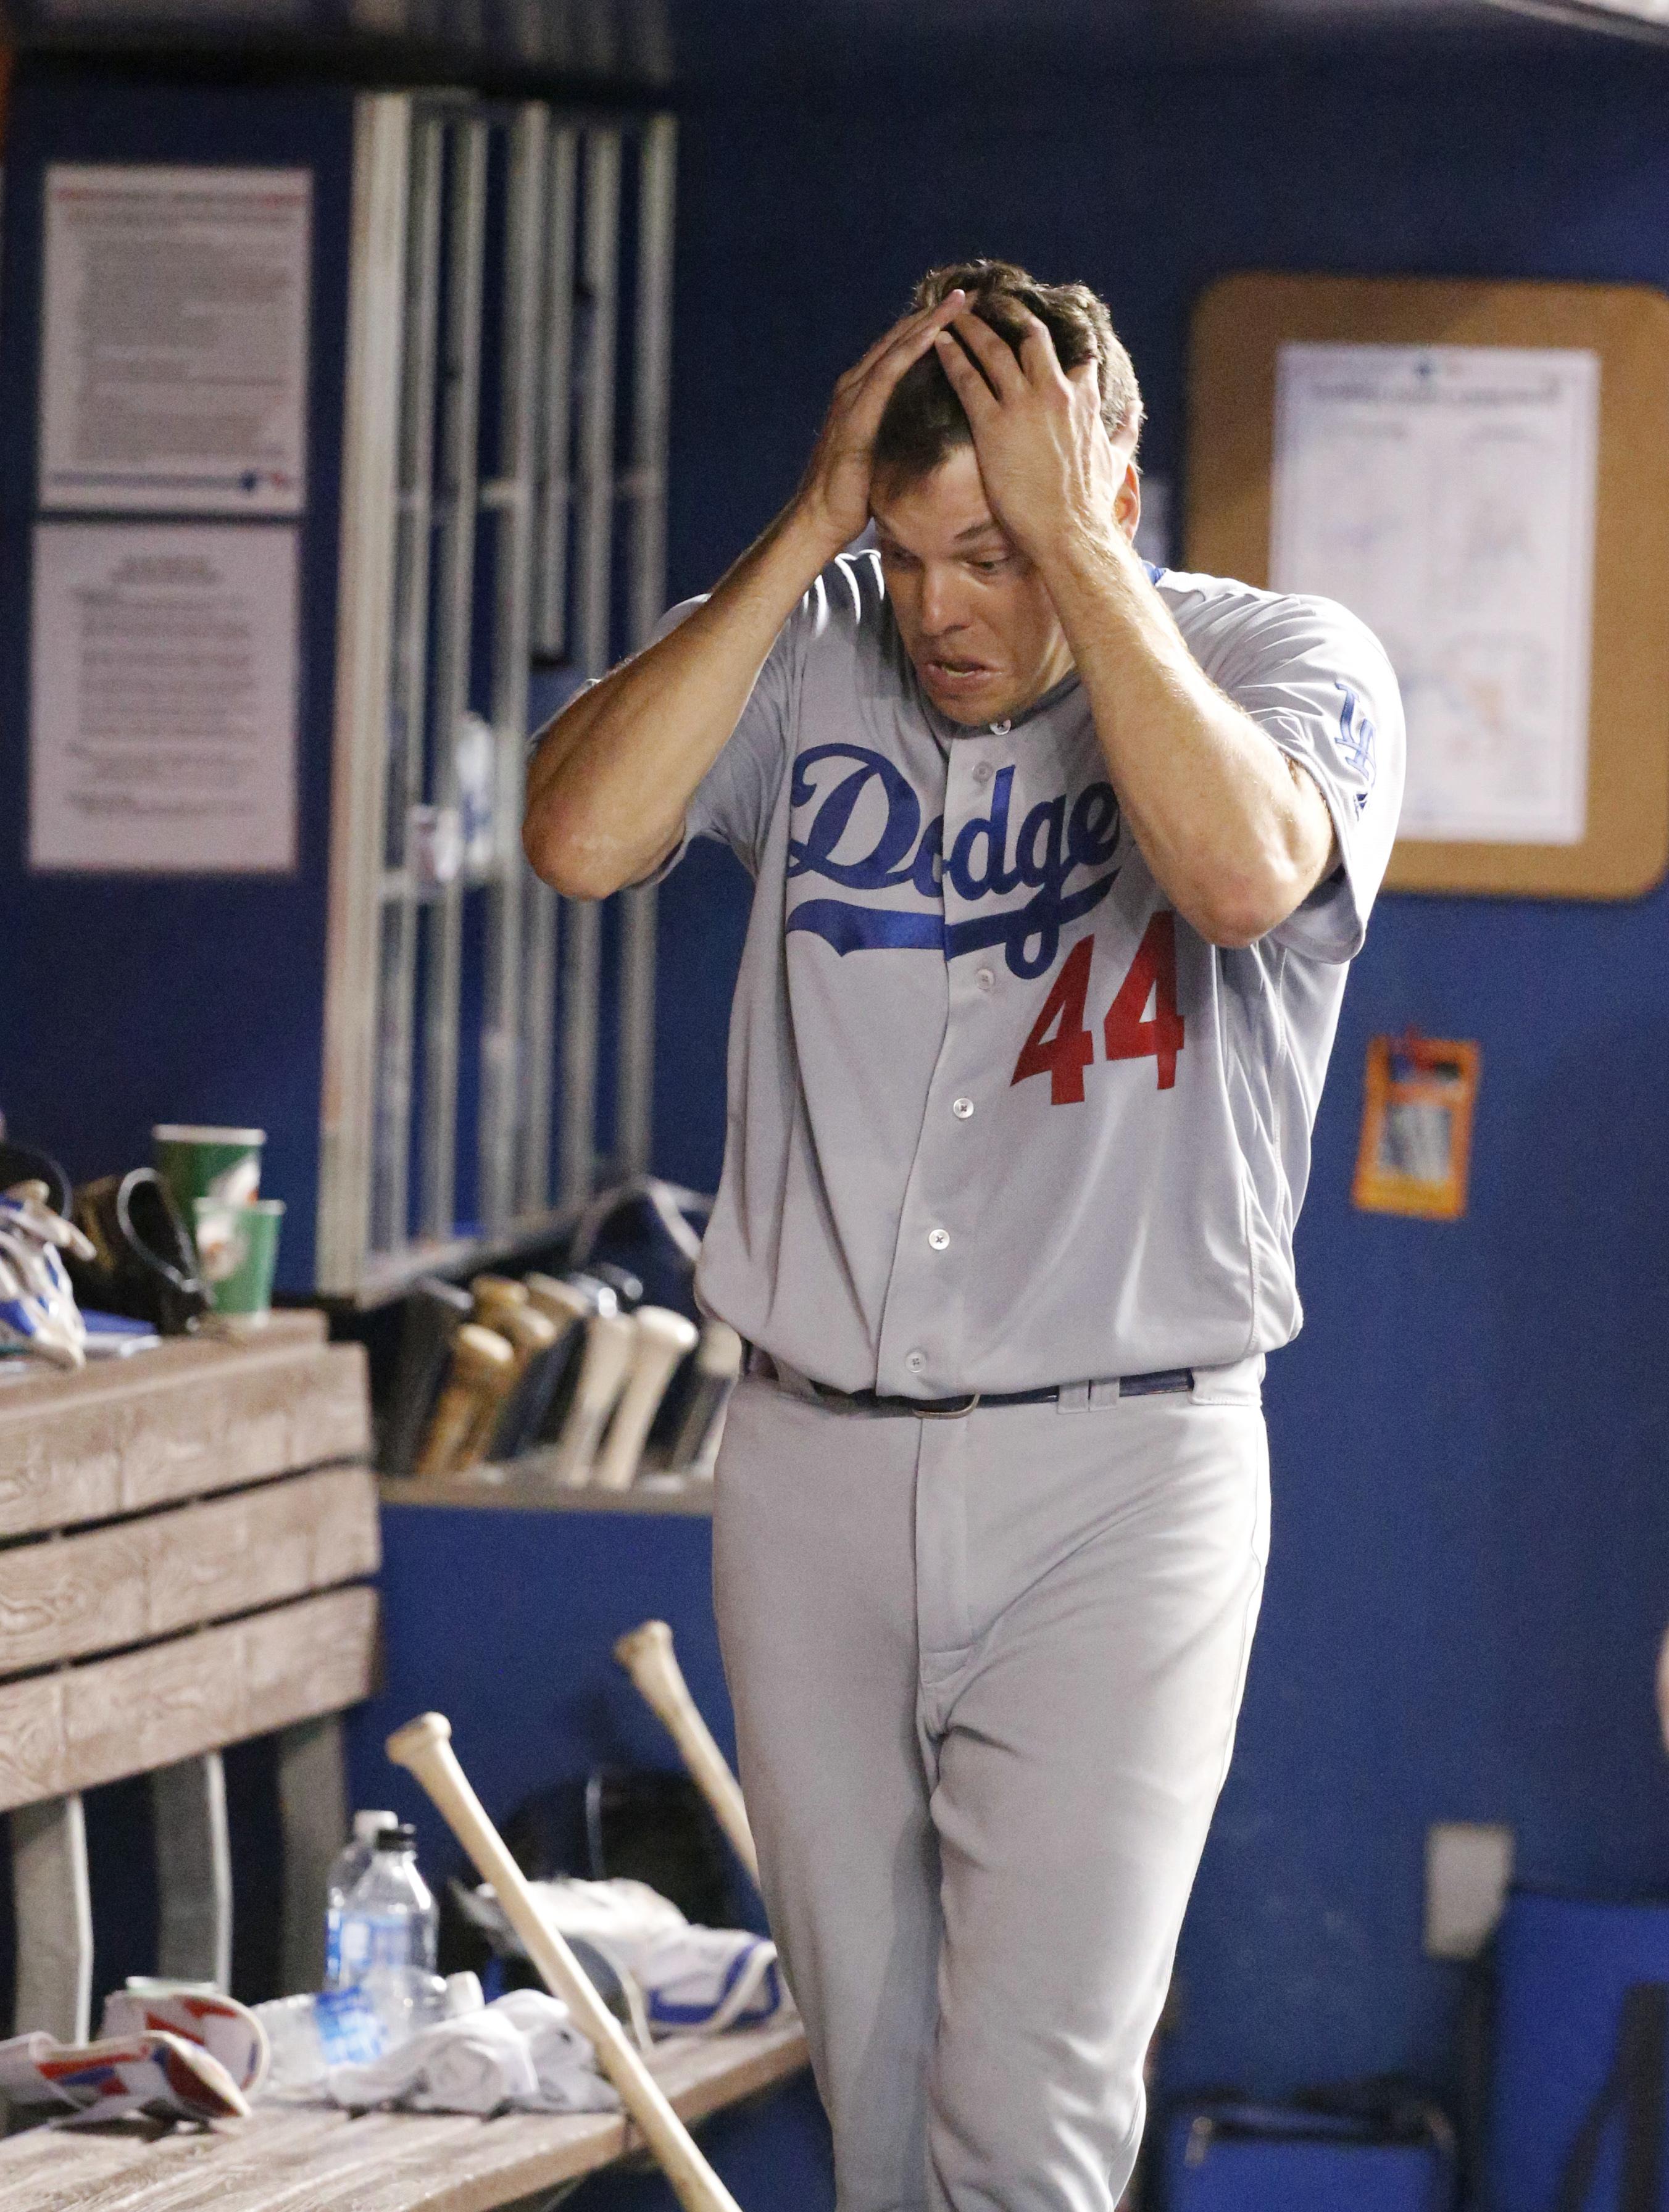 Rich Hill blasts MLB for baseball quality issues: 'Every ball is different